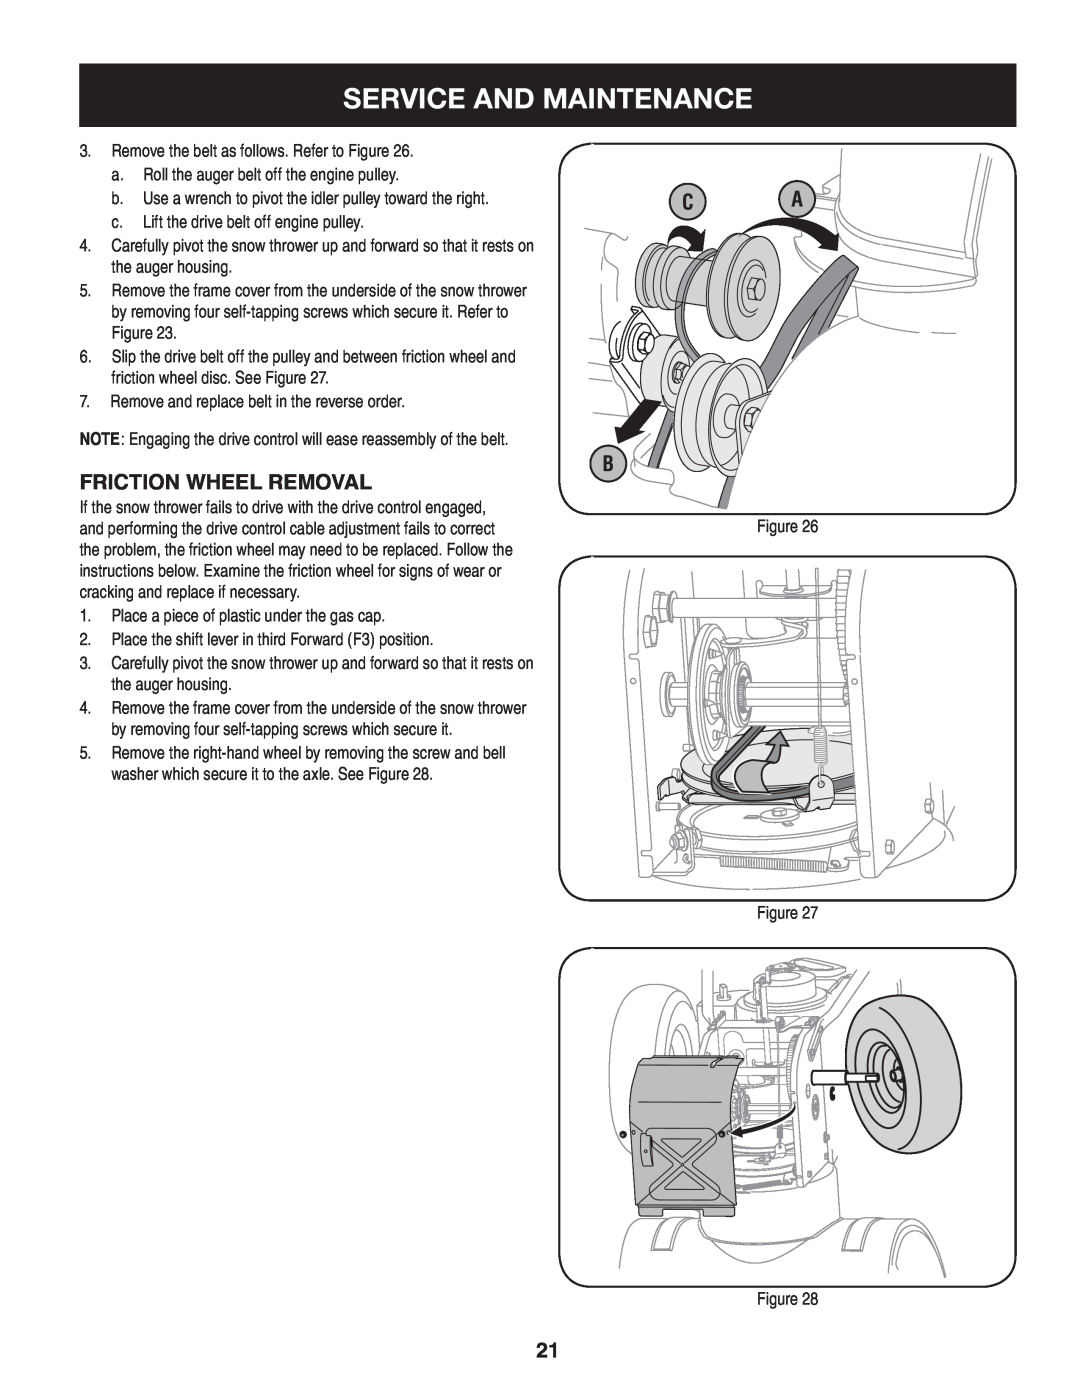 Craftsman 247.8819 operating instructions Service And Maintenance, Friction Wheel Removal 